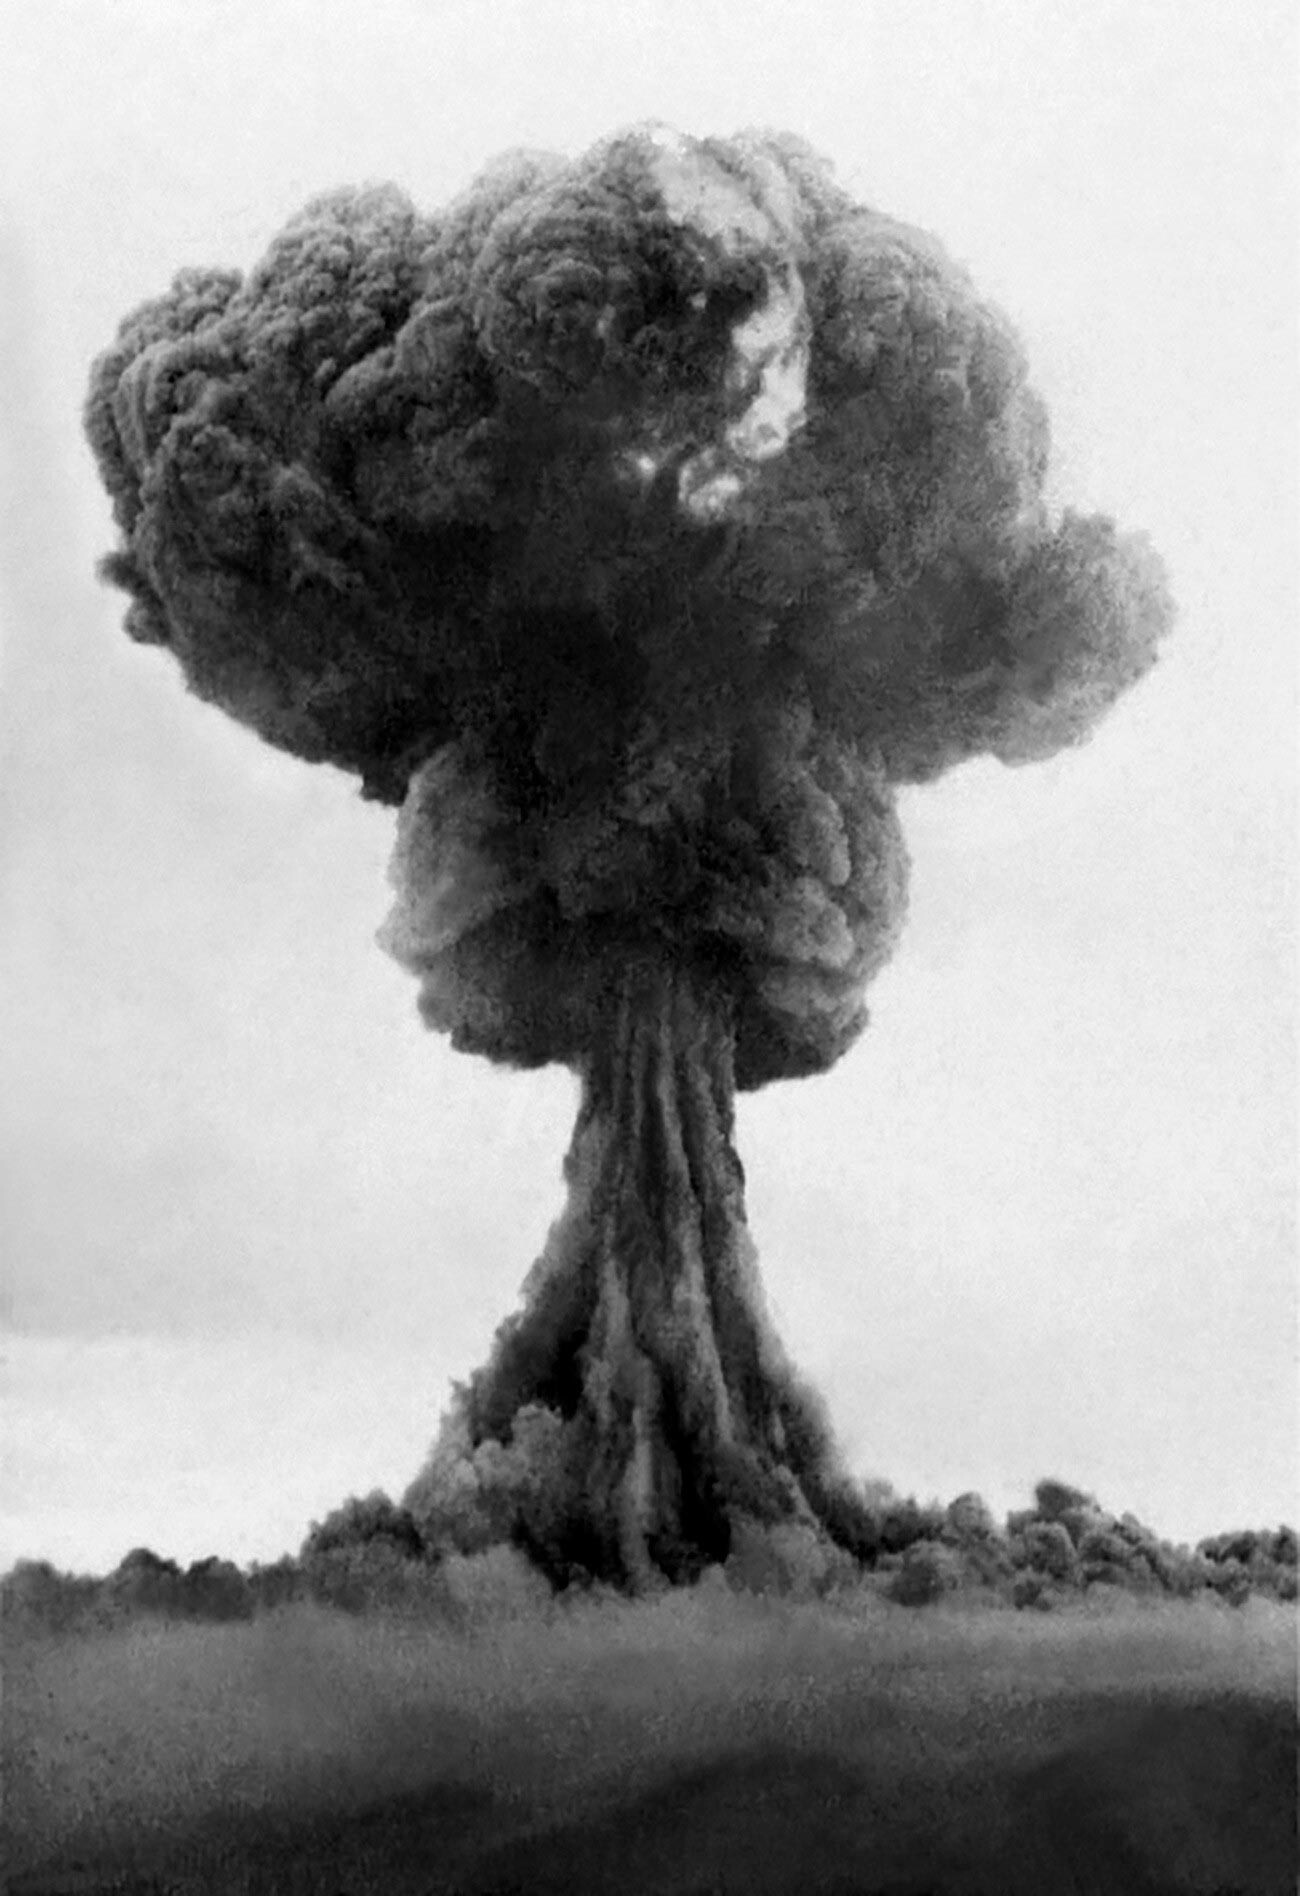 The mushroom cloud after the explosion of RDS-1, the first Soviet nuclear bomb, 1949.